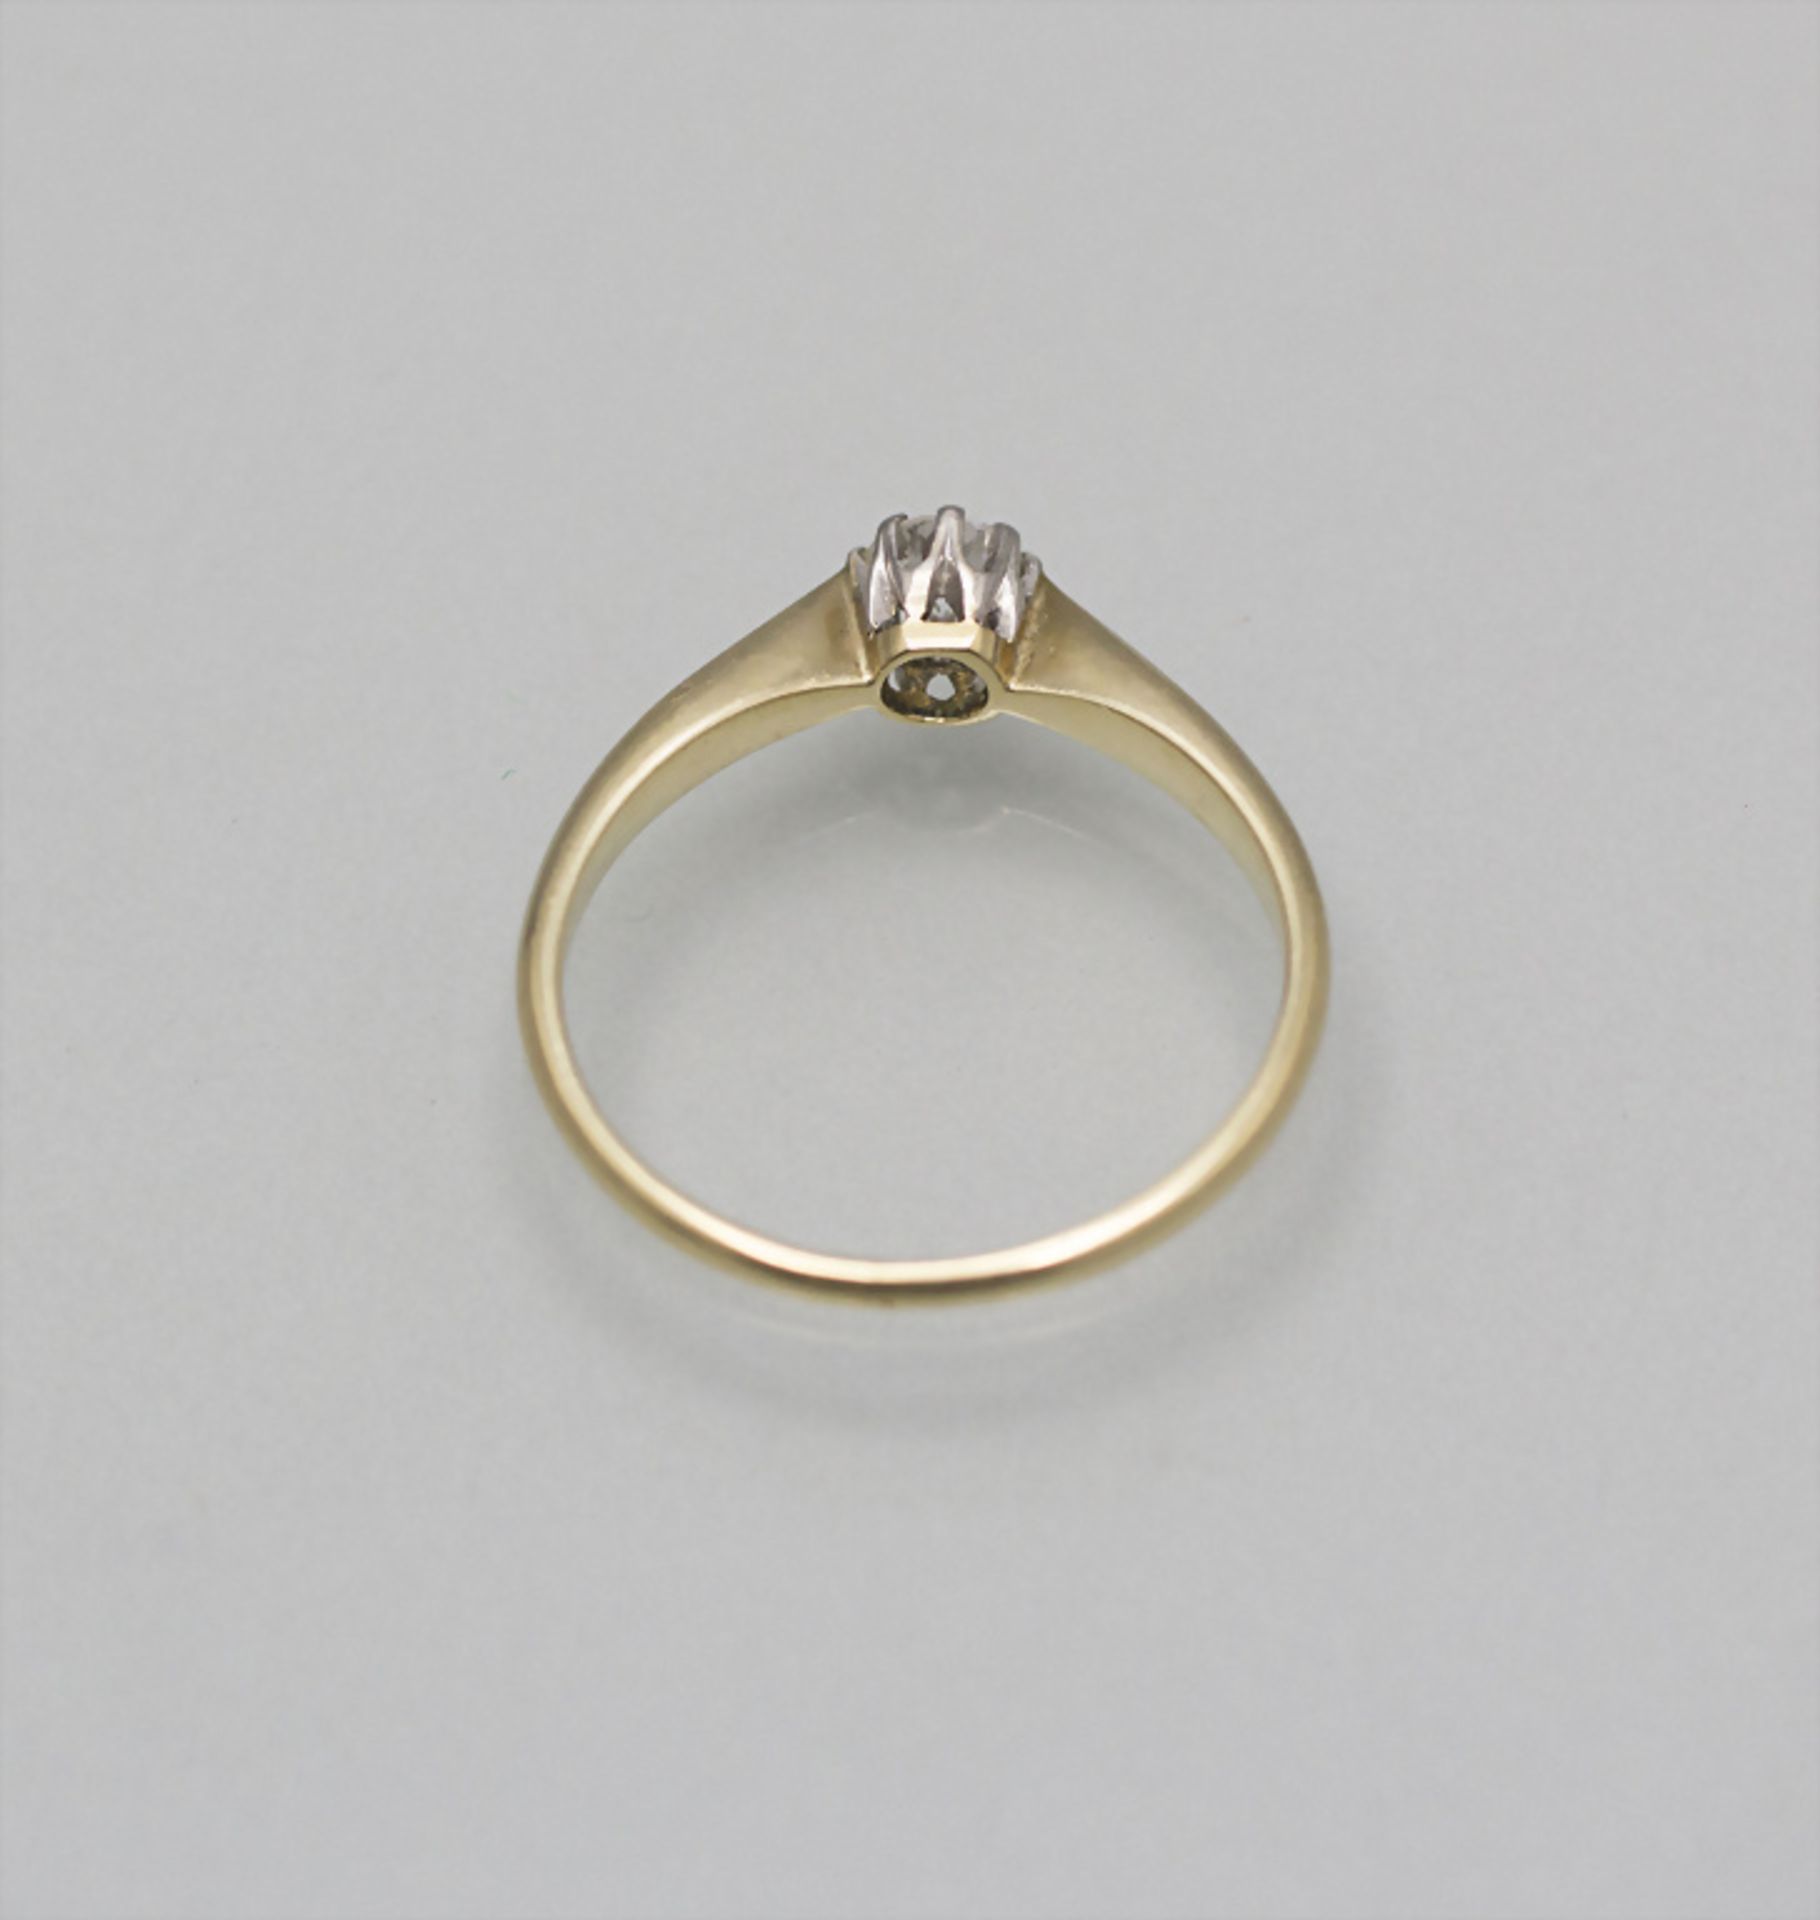 Damenring mit Brillant / A ladies 14 ct gold ring with diamond - Image 2 of 2